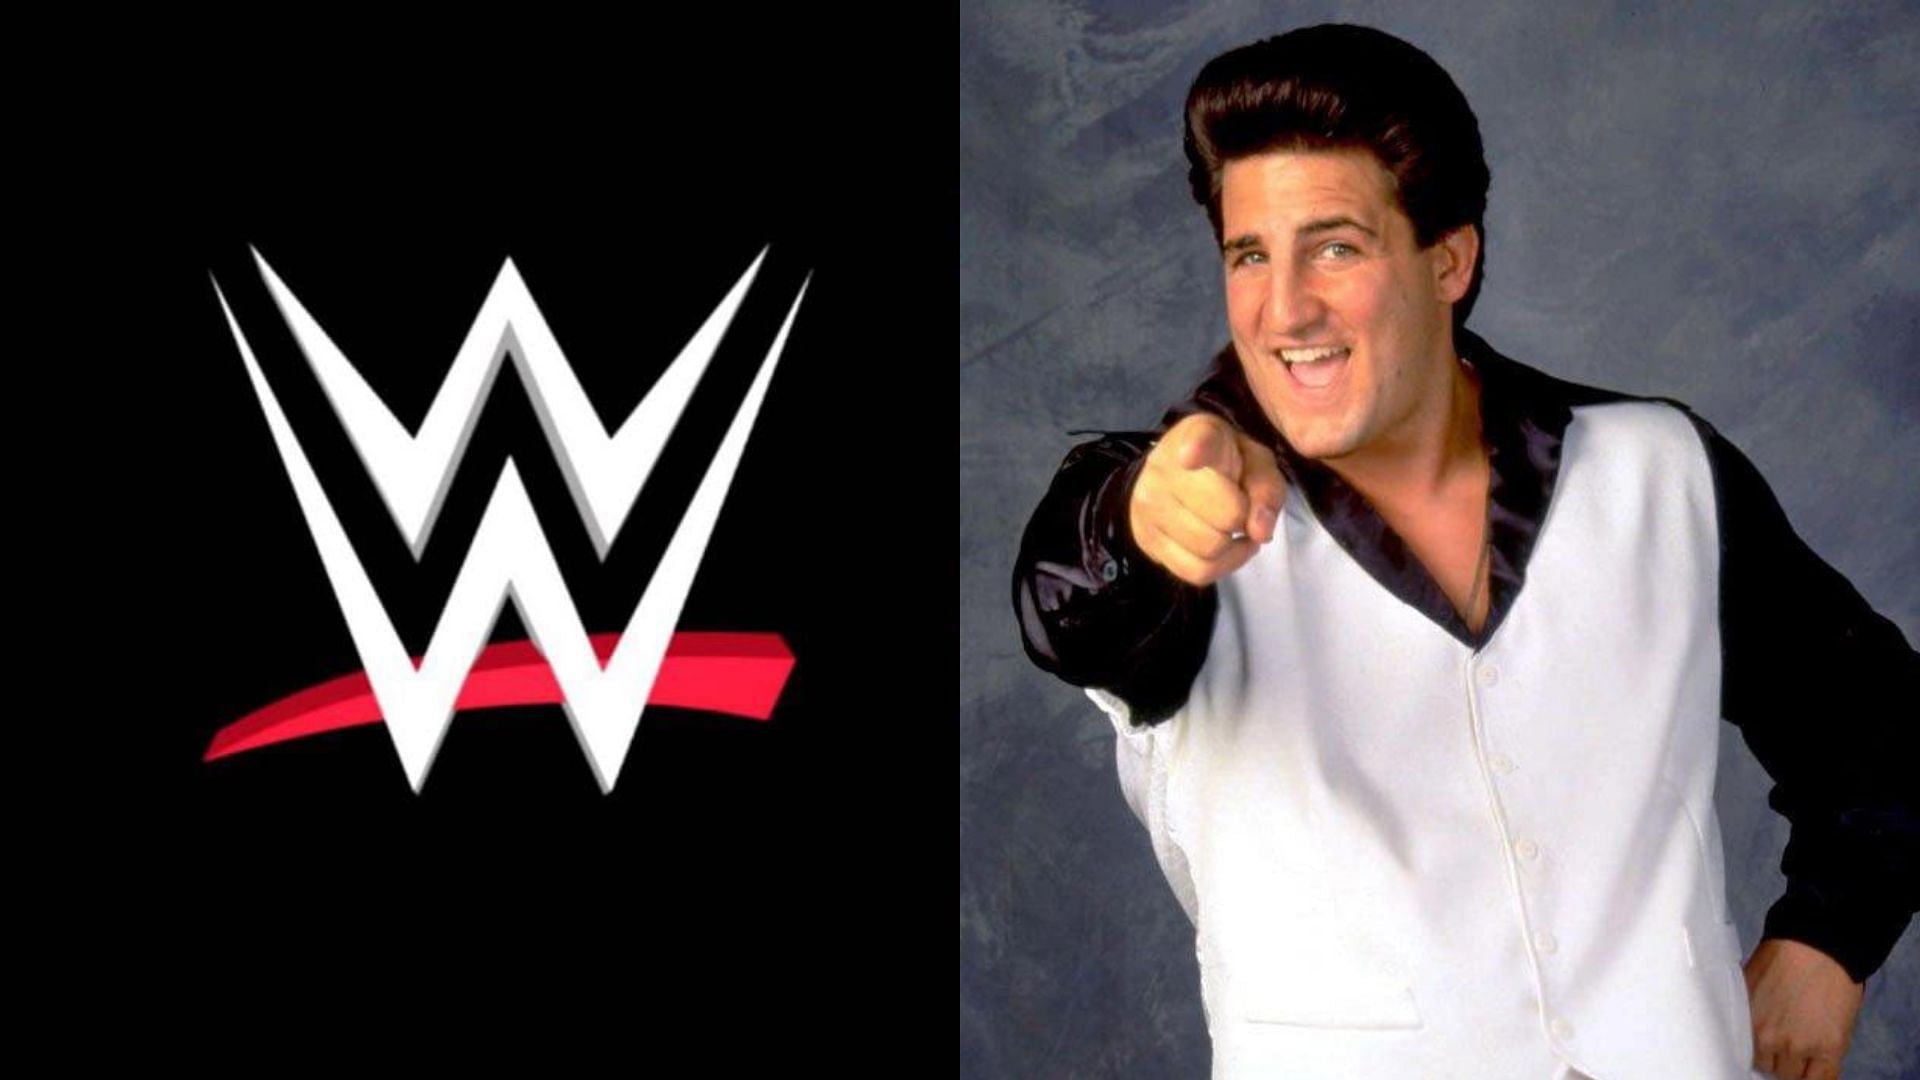 Disco Inferno performed for WCW